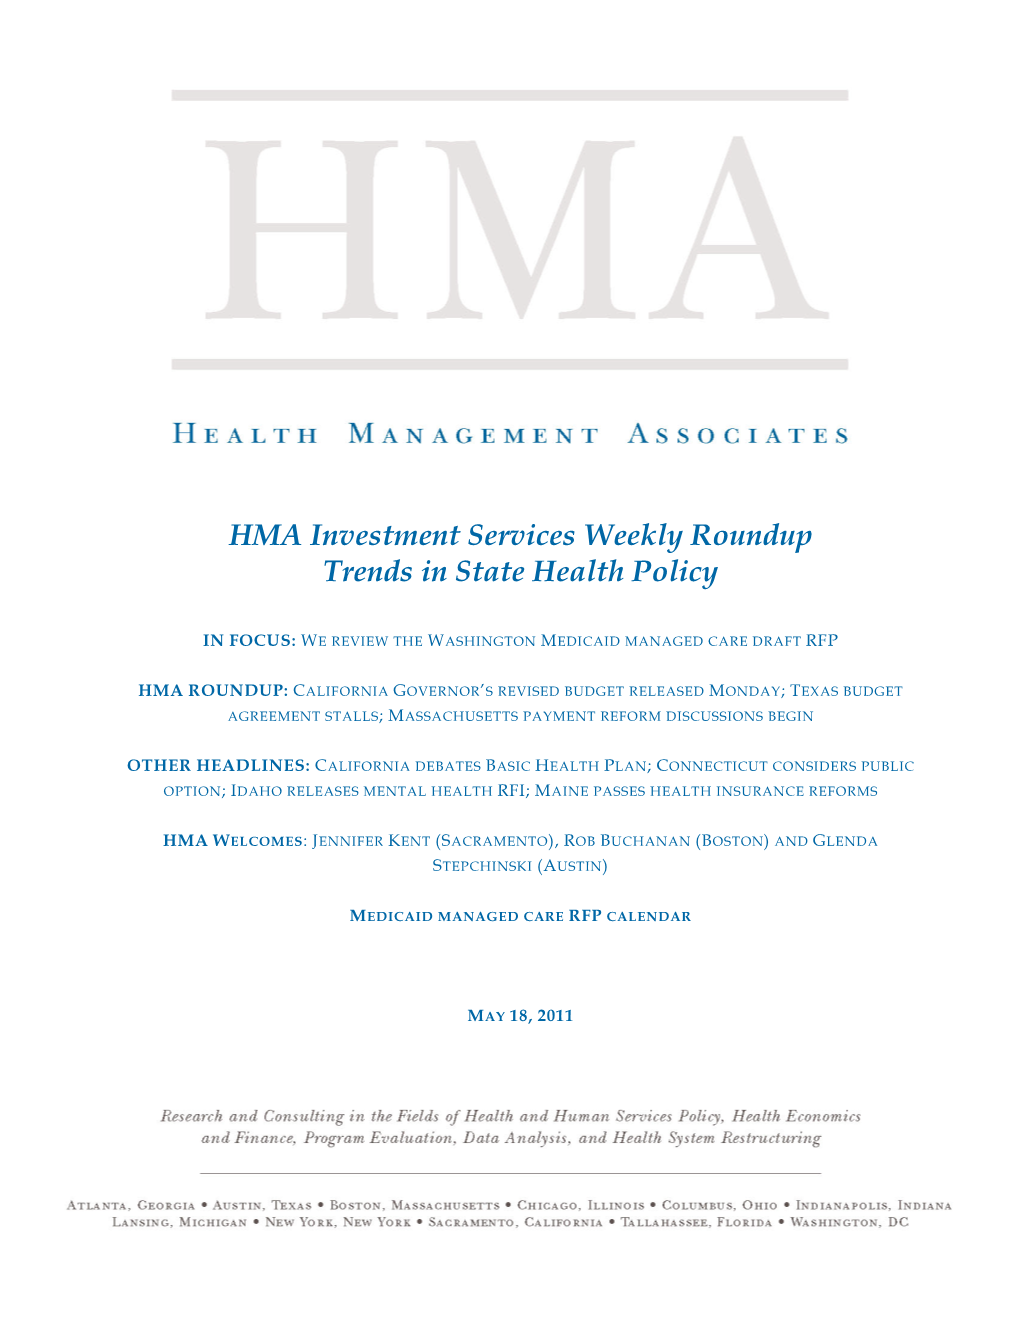 HMA Investment Services Weekly Roundup Trends in State Health Policy